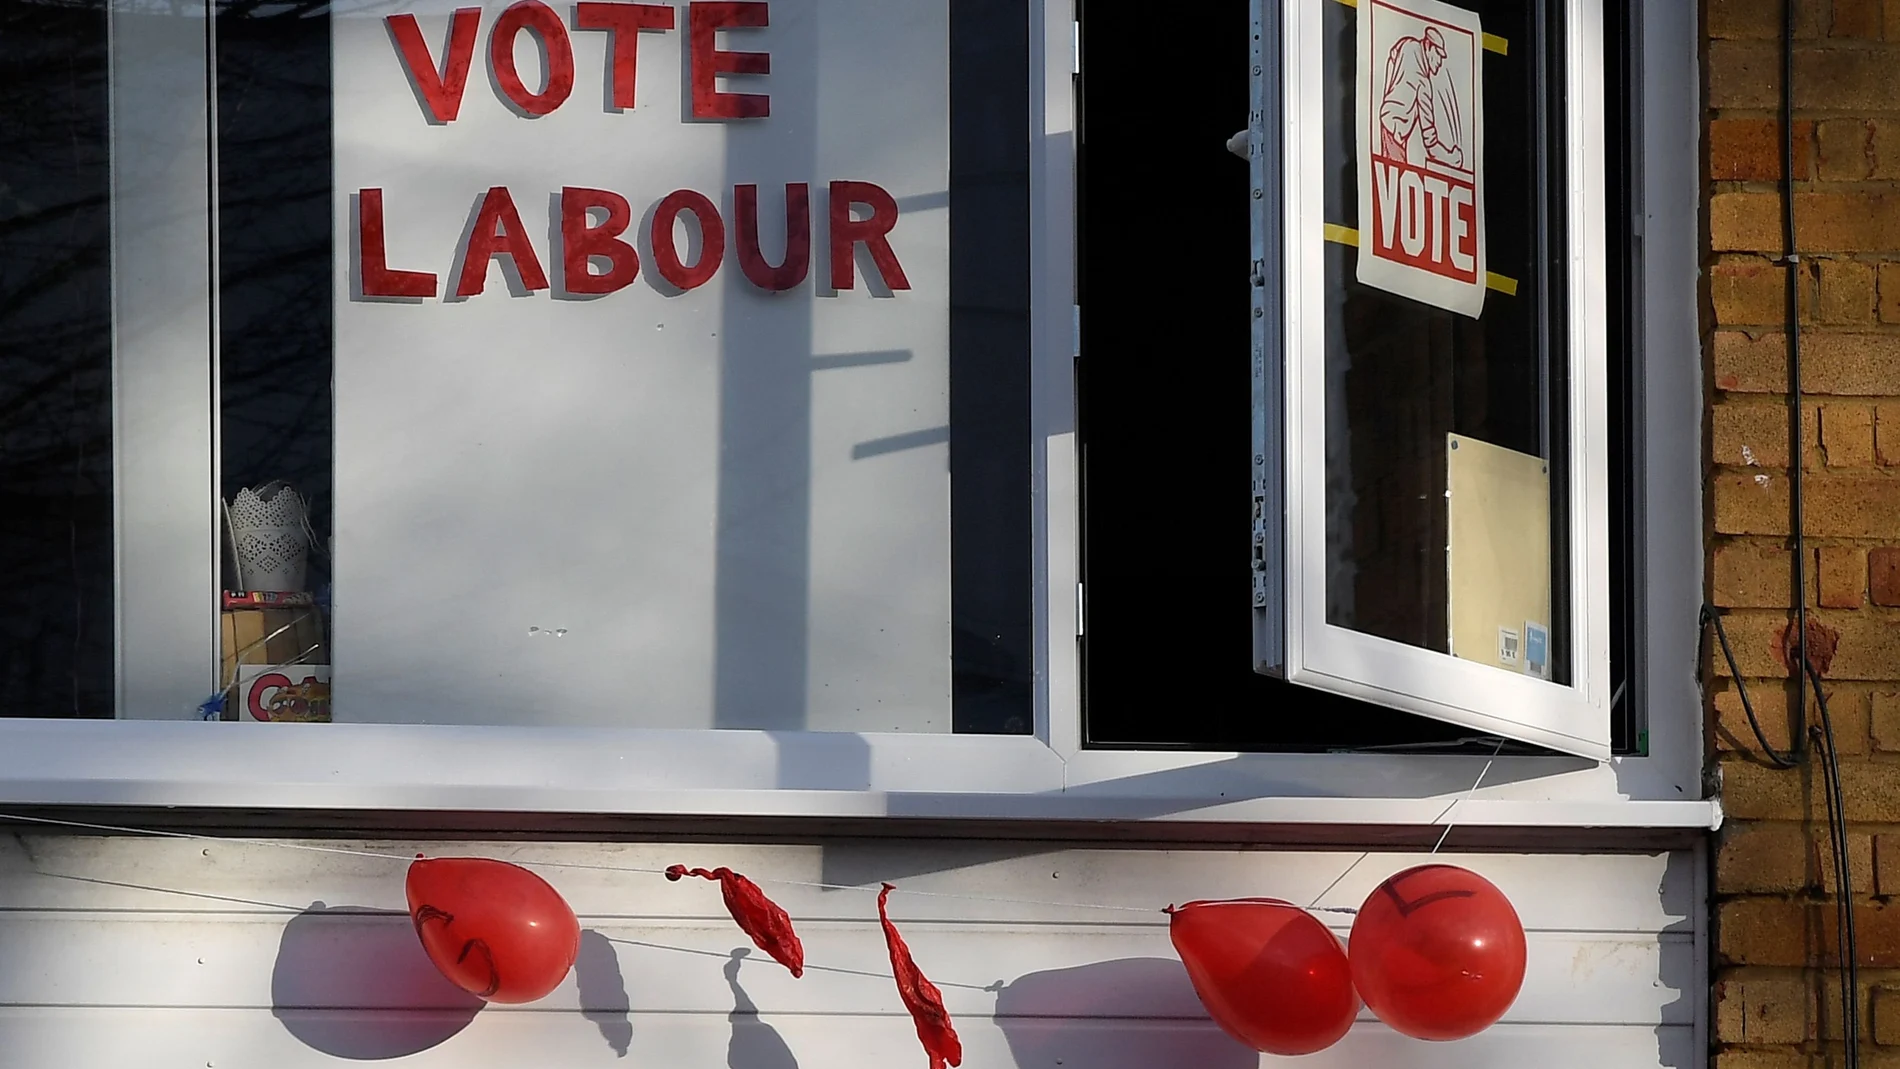 Political election campaign messages and burst balloons are seen at a house in the same street where Labour party leader Jeremy Corbyn lives, London, Britain